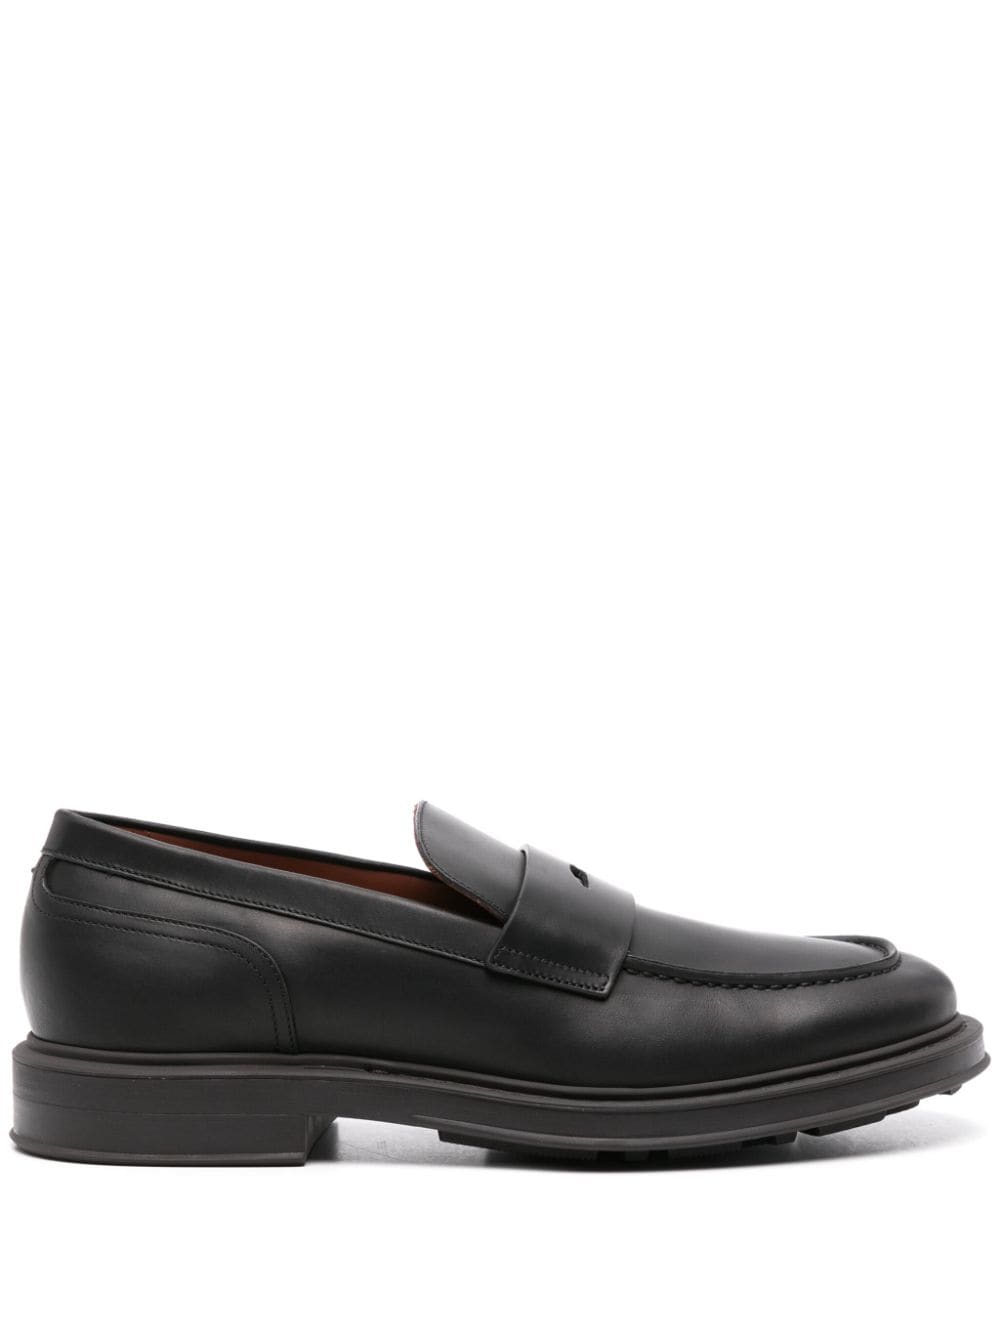 Loro Piana Travis Leather Penny Loafers In Black